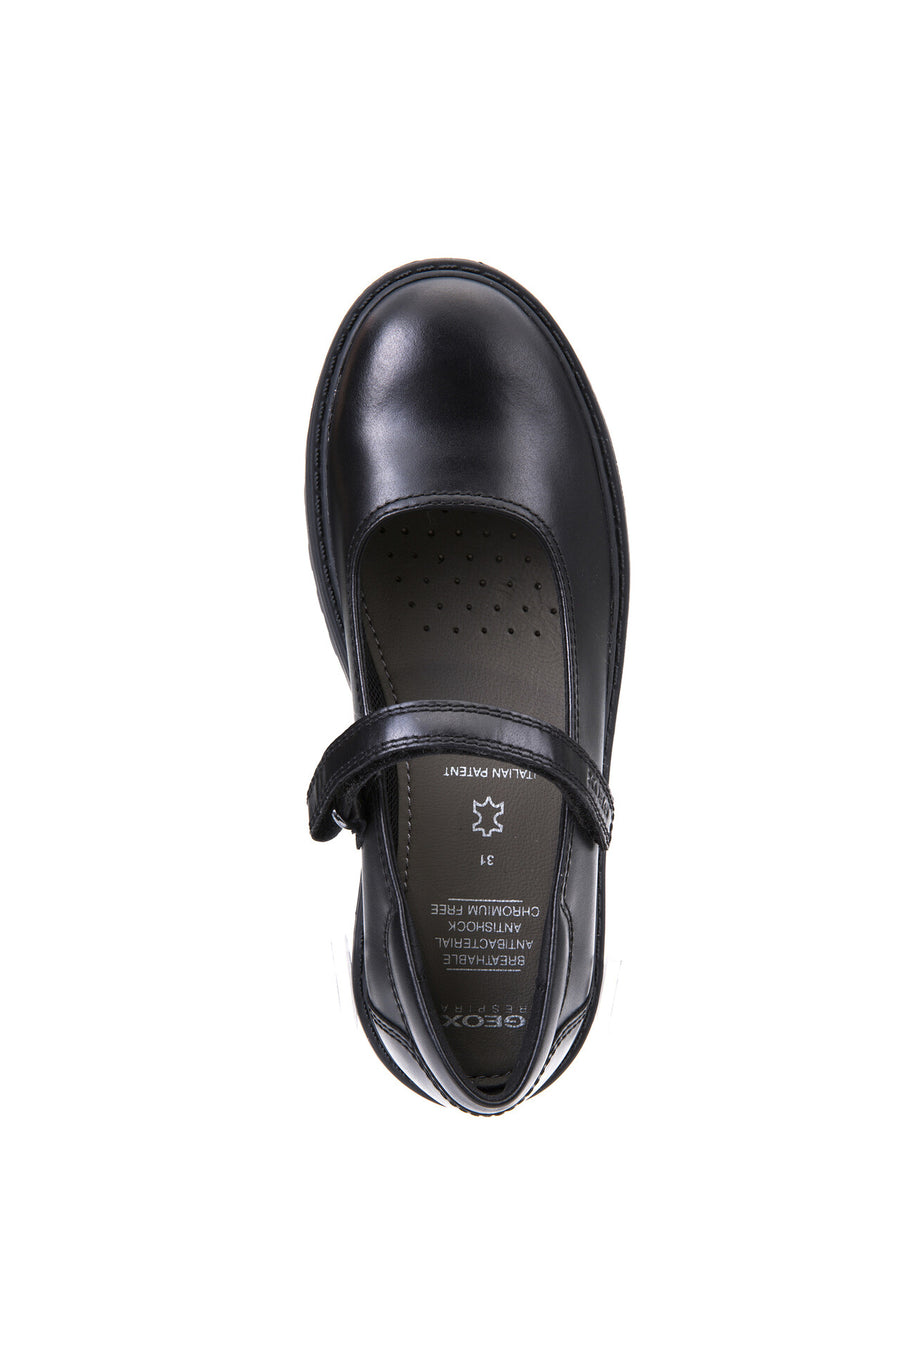 Geox Mary Jane Shoes|Casey|Black Leather